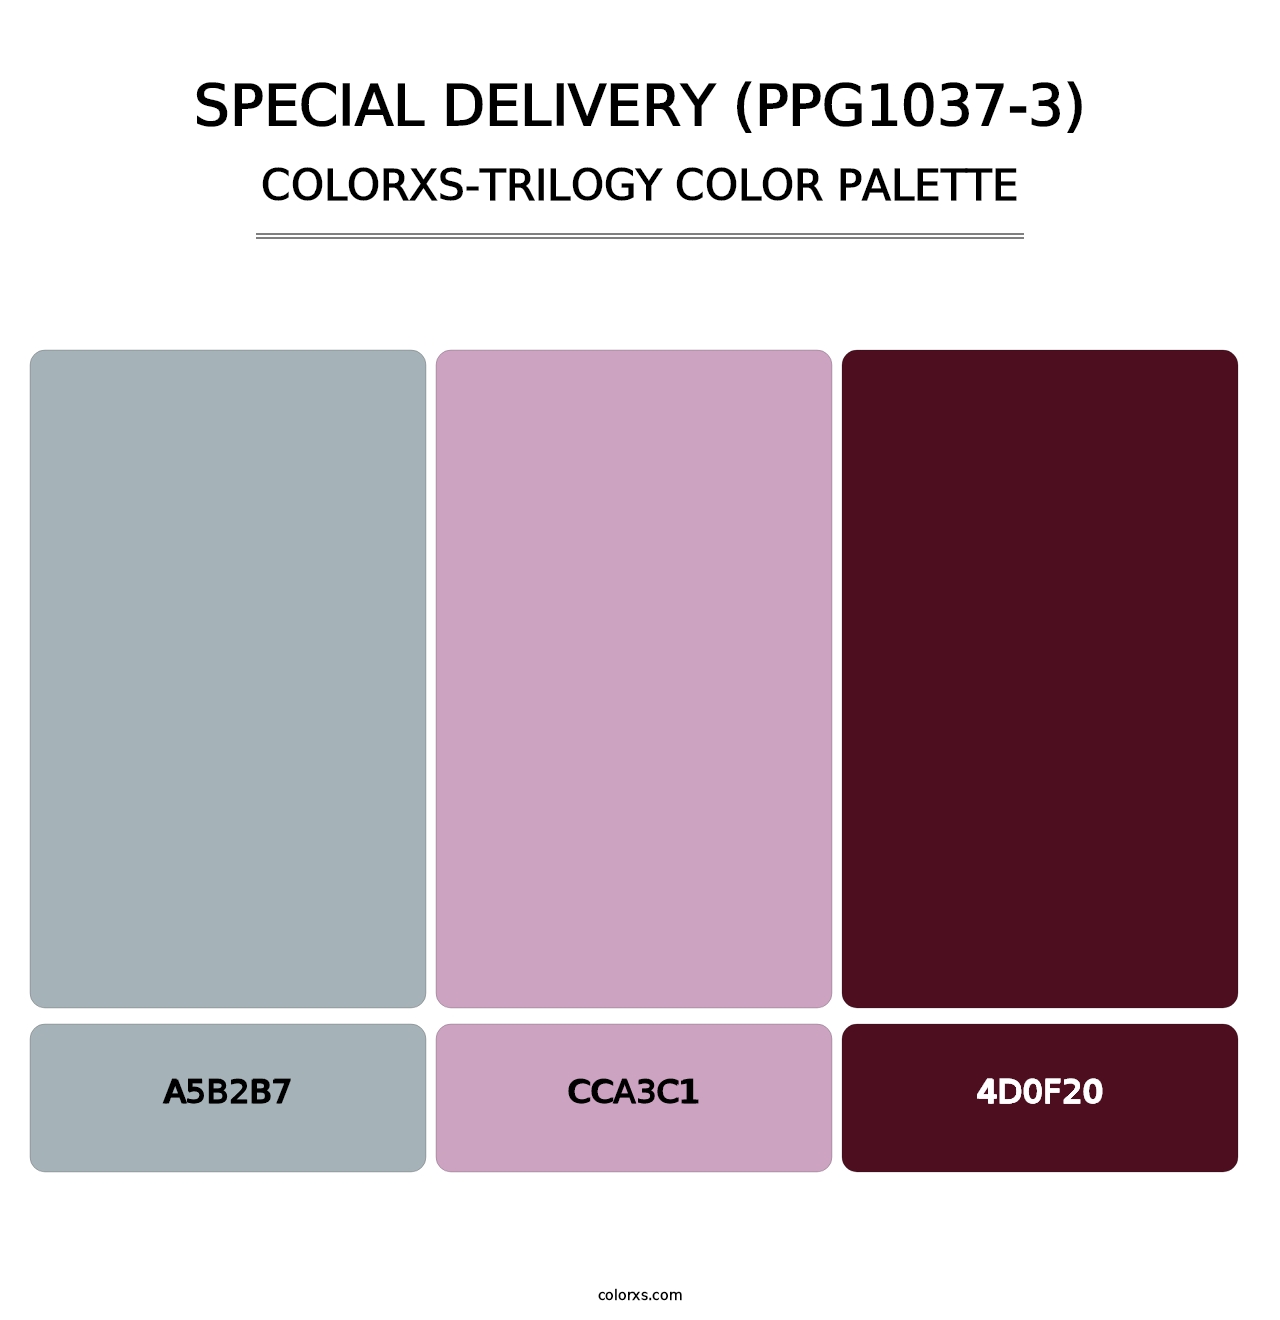 Special Delivery (PPG1037-3) - Colorxs Trilogy Palette